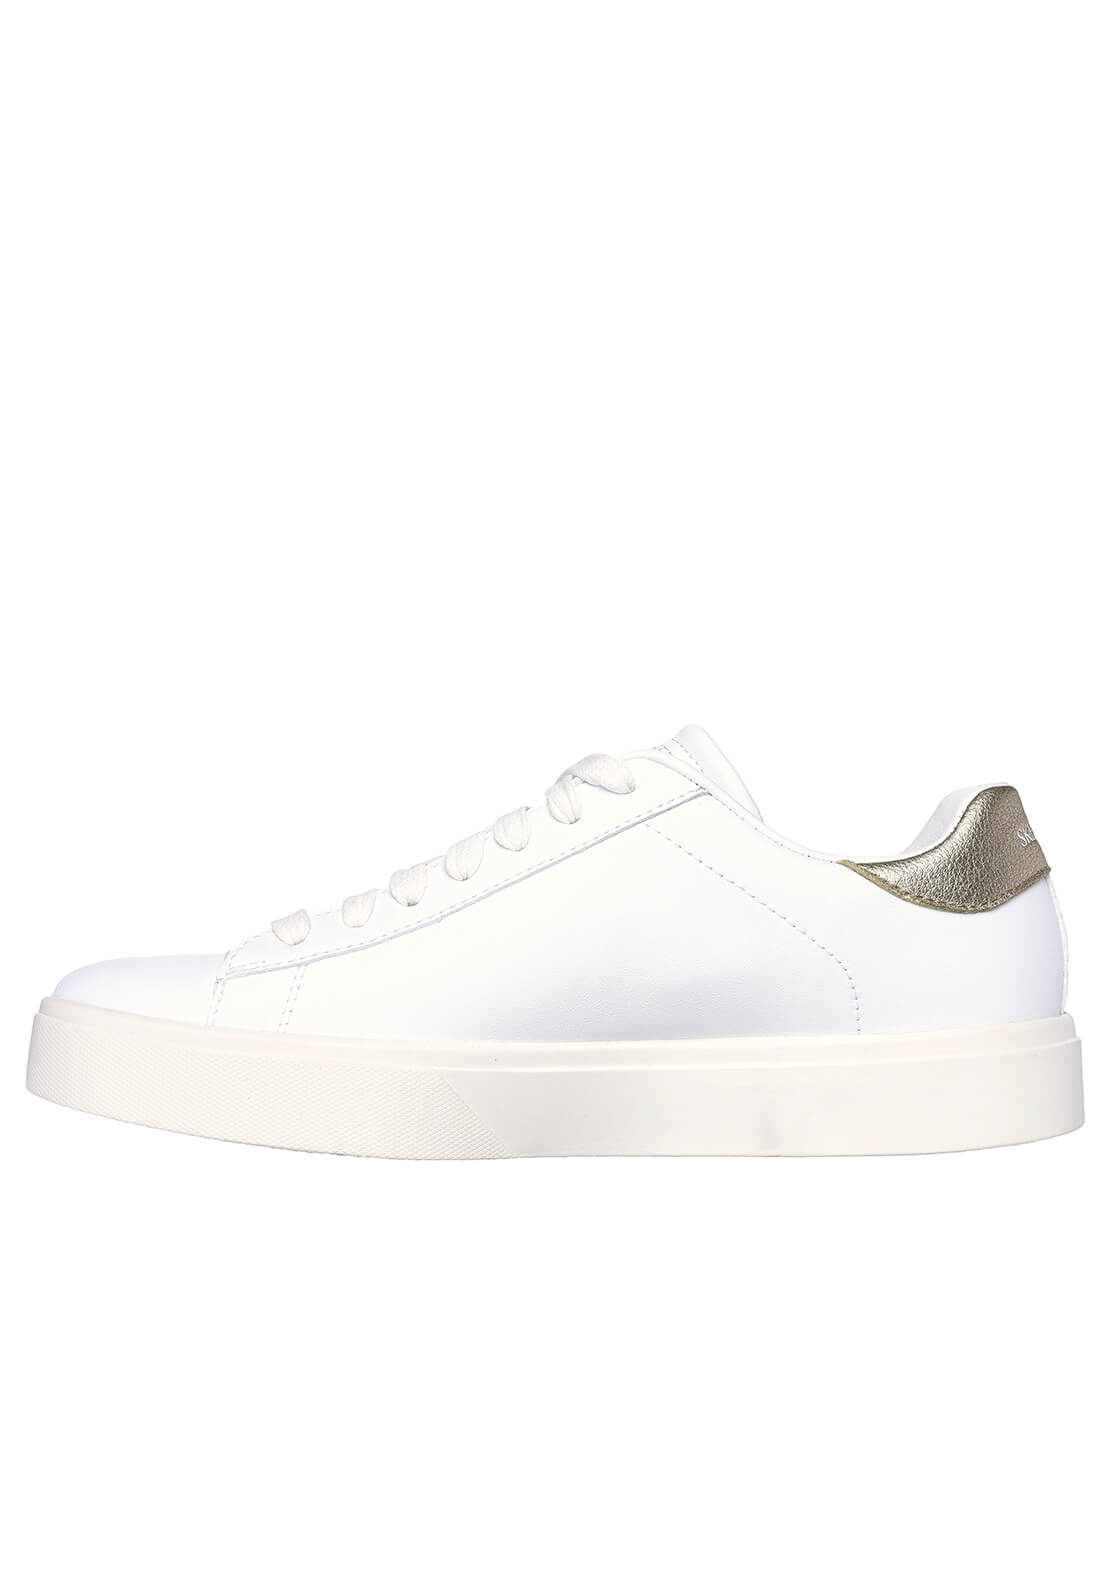 Skechers Eden LX Beaming Glory - White / Gold 5 Shaws Department Stores